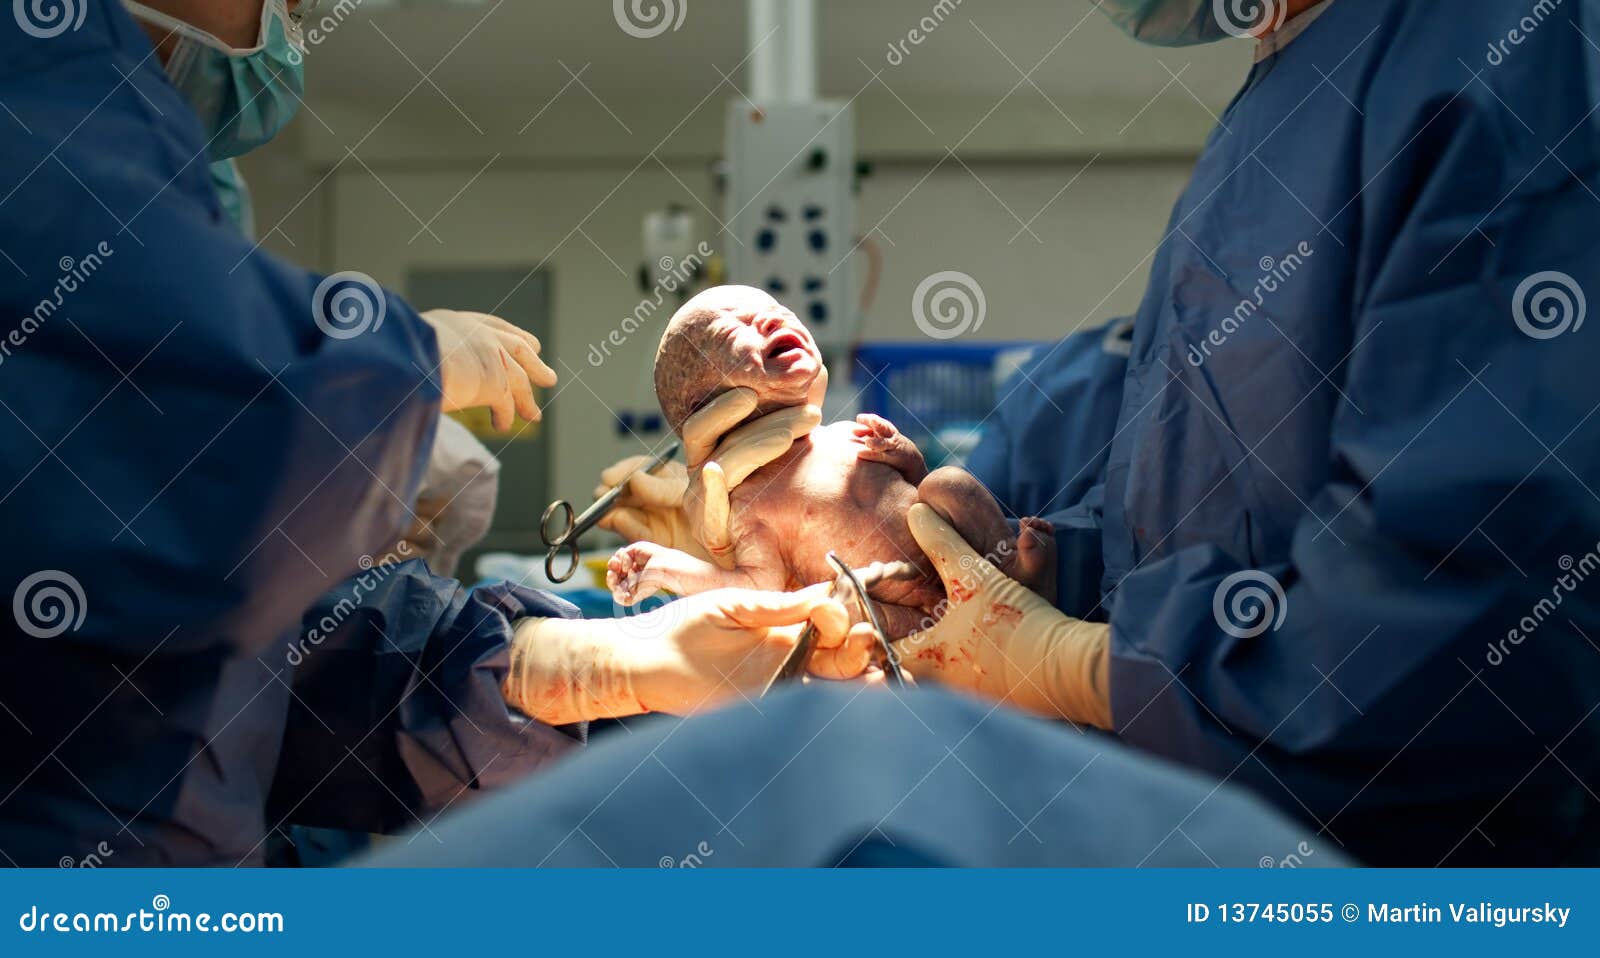 Baby Being Born Via Caesarean Section Stock Image - Image ...